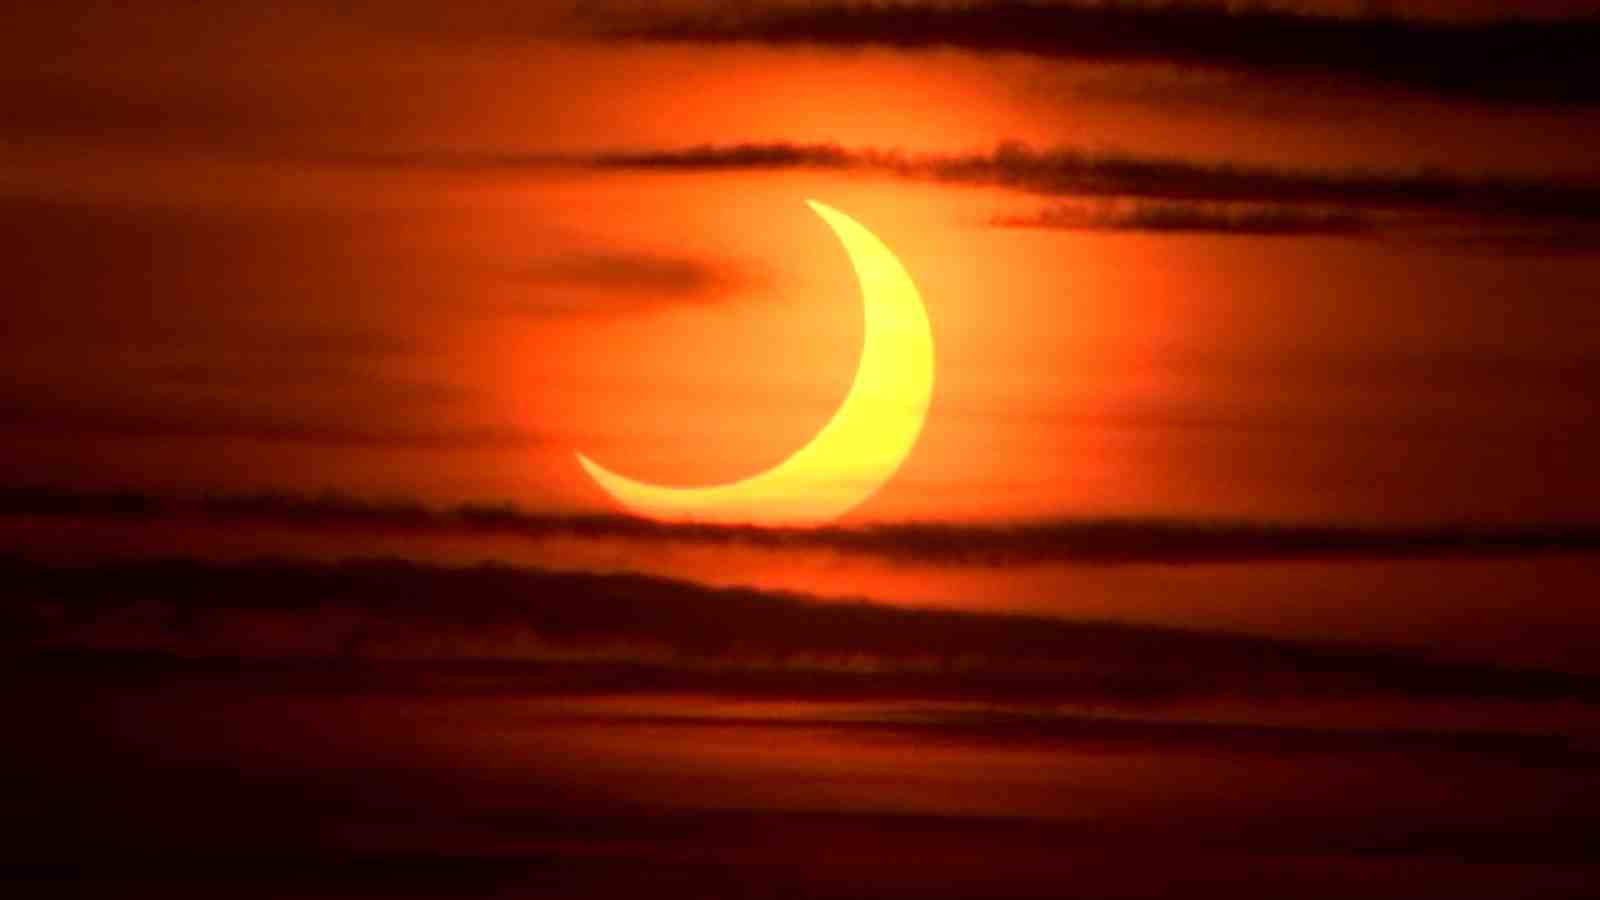 How many solar eclipses will there be in 2021?